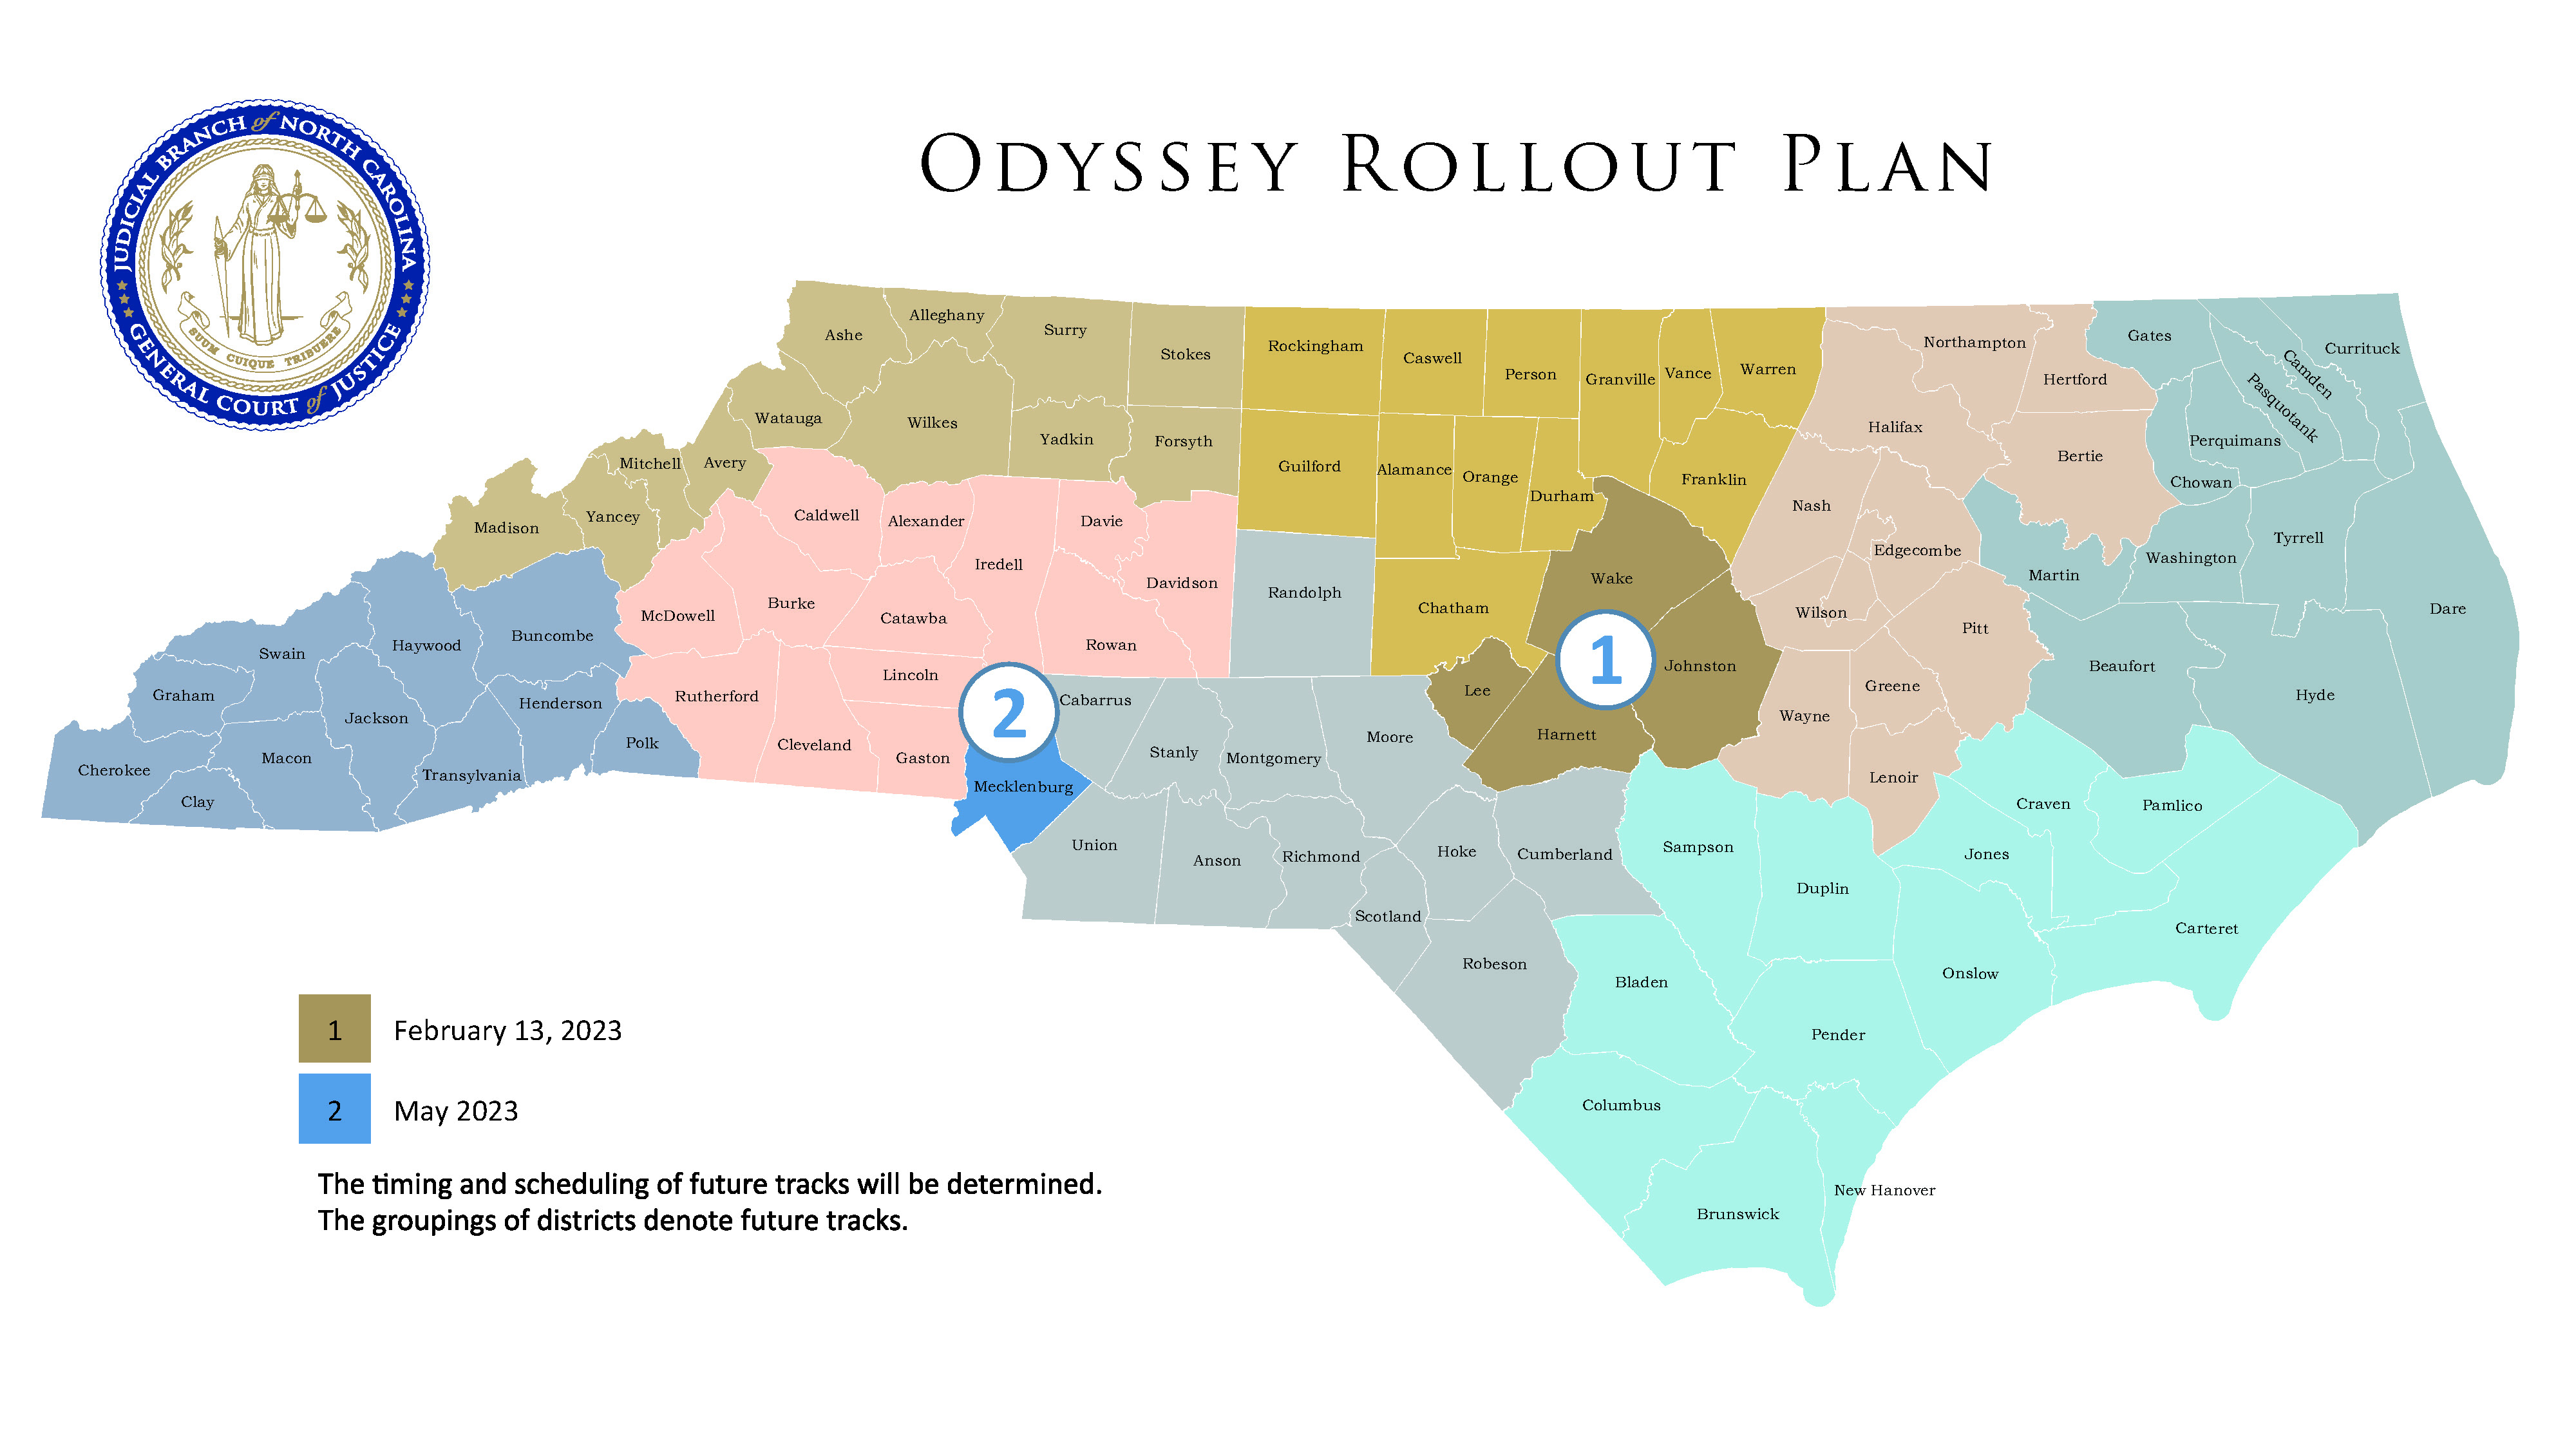 Odyssey Rollout Plan Map